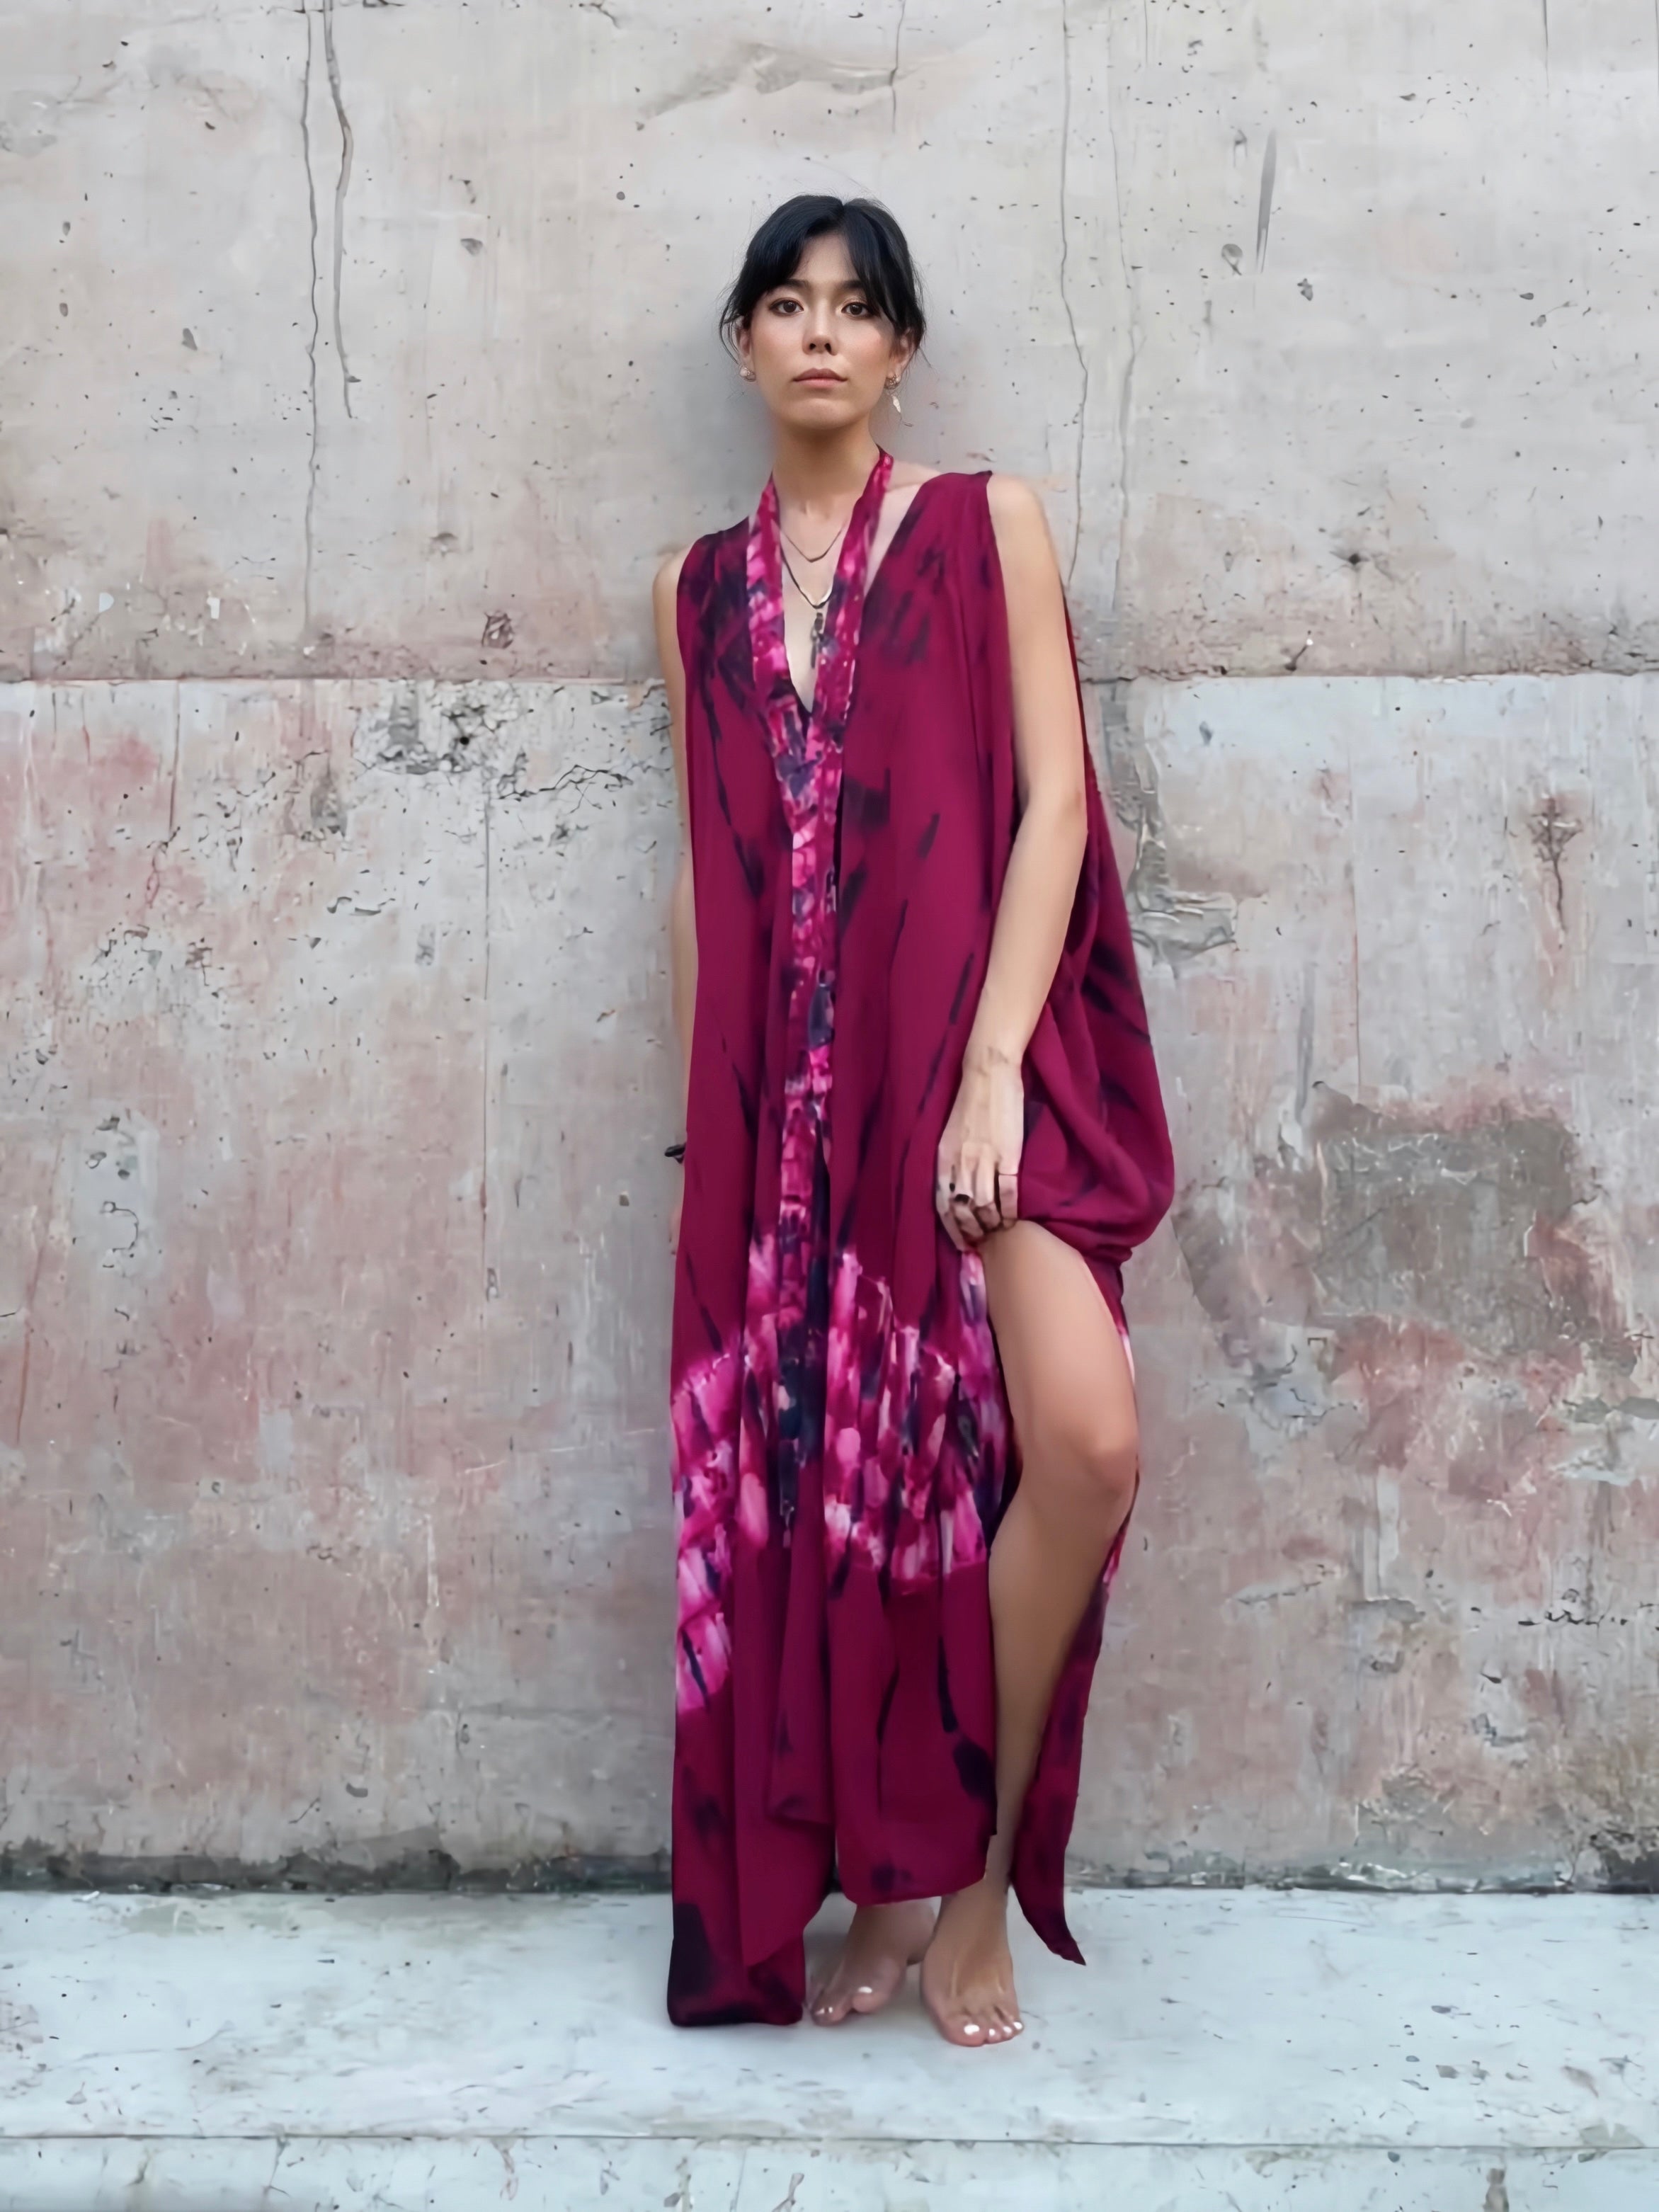 Shop our Fara Tie Dye Kaftan, this is a unique convertible dress perfect for any occasion. Its bold red magenta color is complemented by a boho vibes  that will make any outfit stand out without sacrificing comfort. 